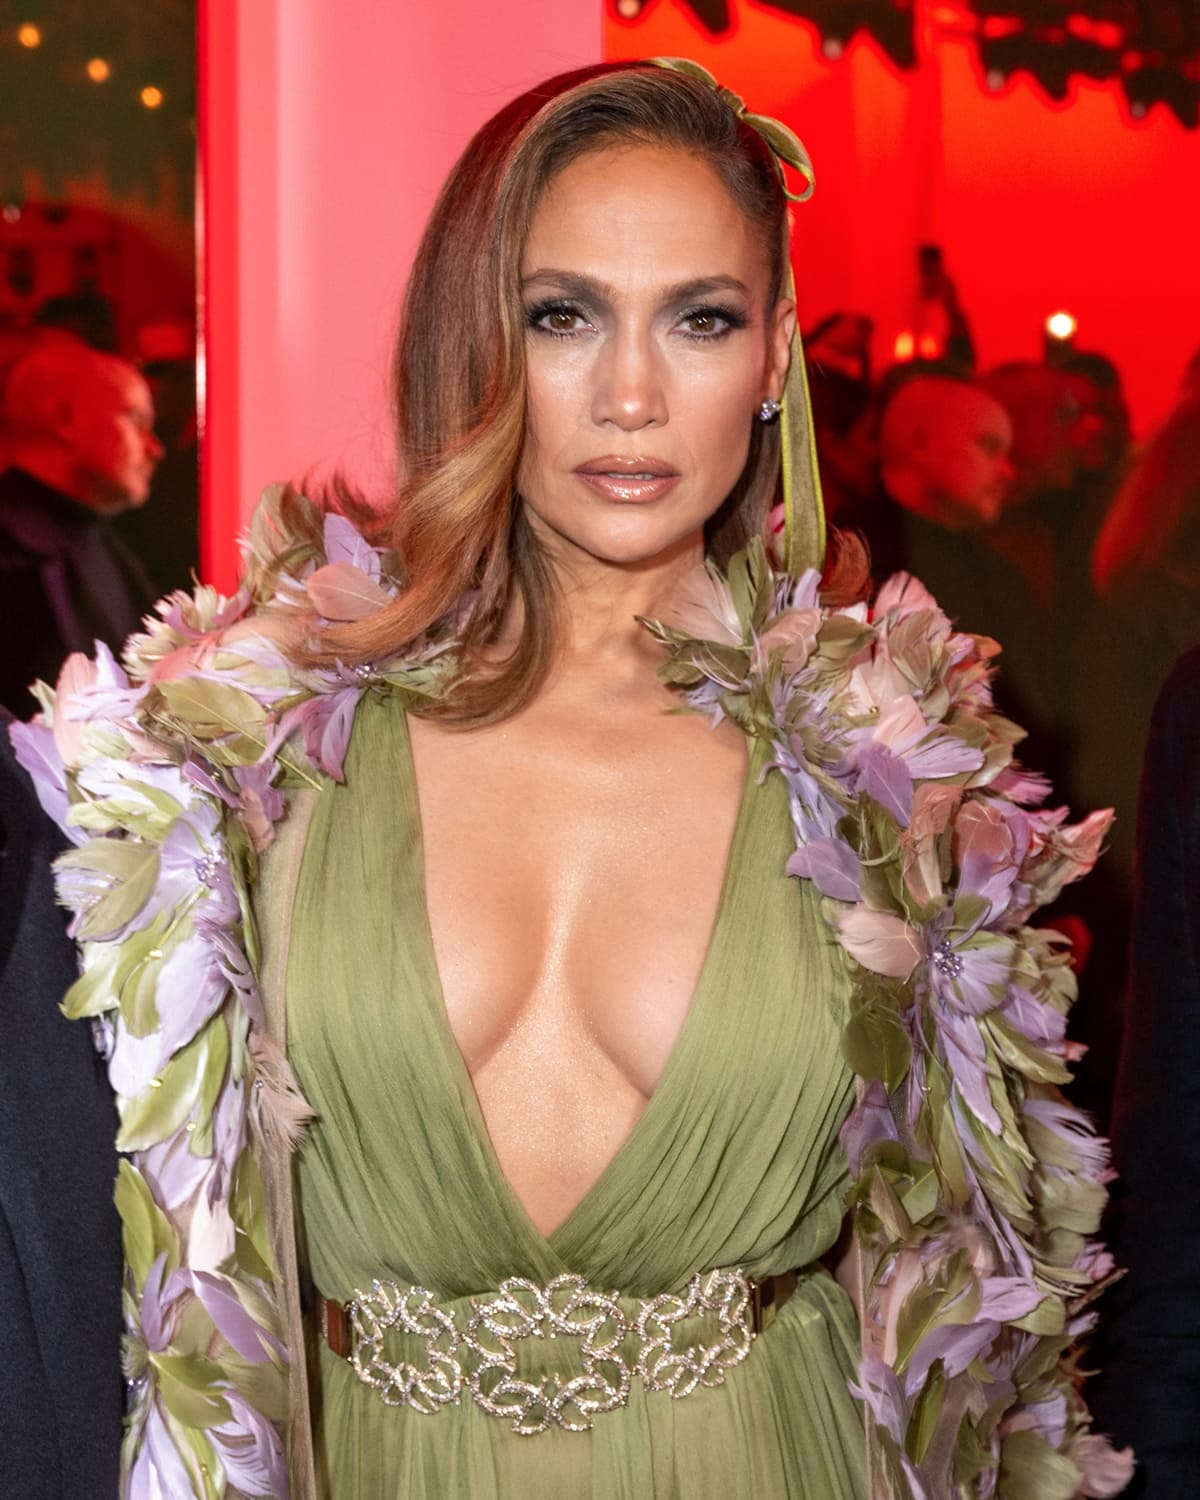 In a breathtaking Elie Saab light green gown adorned with a floral cape, Jennifer Lopez captivates the audience, blending Greek goddess elegance with a touch of whimsical charm